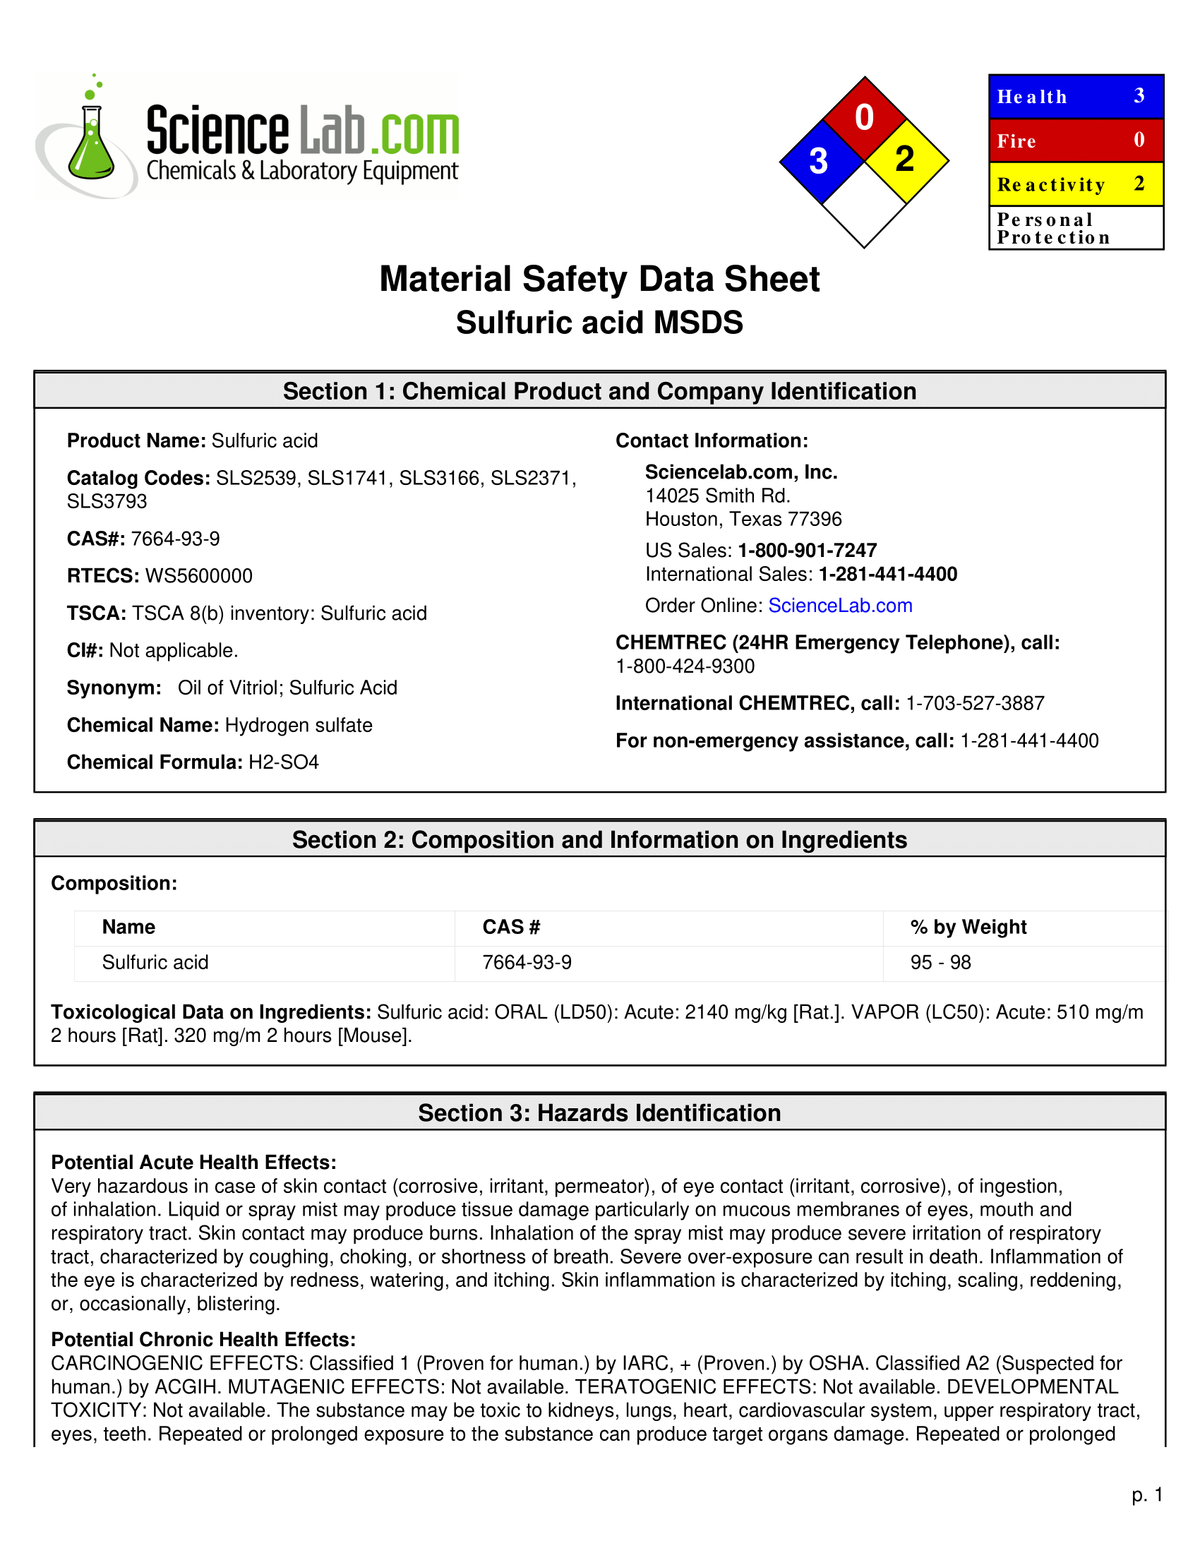 He a lth
3
Science Lab.com
Fire
Chemicals & Laboratory Equipment
2
Re activity
2
Pe rs onal
Protection
Material Safety Data Sheet
Sulfuric acid MSDS
Section 1: Chemical Product and Company ldentification
Product Name: Sulfuric acid
Contact Information:
Catalog Codes: SLS2539, SLS1741, SLS3166, SLS2371,
SLS3793
Sciencelab.com, Inc.
14025 Smith Rd.
Houston, Texas 77396
CAS#: 7664-93-9
US Sales: 1-800-901-7247
RTECS: WS5600000
International Sales: 1-281-441-4400
Order Online: ScienceLab.com
TSCA: TSCA 8(b) inventory: Sulfuric acid
CI#: Not applicable.
CHEMTREC (24HR Emergency Telephone), call:
1-800-424-9300
Synonym: Oil of Vitriol; Sulfuric Acid
International CHEMTREC, call: 1-703-527-3887
Chemical Name: Hydrogen sulfate
For non-emergency assistance, call: 1-281-441-4400
Chemical Formula: H2-SO4
Section 2: Composition and Information on Ingredients
Composition:
Name
CAS #
% by Weight
Sulfuric acid
7664-93-9
95 - 98
Toxicological Data on Ingredients: Sulfuric acid: ORAL (LD50): Acute: 2140 mg/kg [Rat.]. VAPOR (LC50): Acute: 510 mg/m
2 hours [Rat]. 320 mg/m 2 hours [Mouse].
Section 3: Hazards Identification
Potential Acute Health Effects:
Very hazardous in case of skin contact (corrosive, irritant, permeator), of eye contact (irritant, corrosive), of ingestion,
of inhalation. Liquid or spray mist may produce tissue damage particularly on mucous membranes of eyes, mouth and
respiratory tract. Skin contact may produce burns. Inhalation of the spray mist may produce severe irritation of respiratory
tract, characterized by coughing, choking, or shortness of breath. Severe over-exposure can result in death. Inflammation of
the eye is characterized by redness, watering, and itching. Skin inflammation is characterized by itching, scaling, reddening,
or, occasionally, blistering.
Potential Chronic Health Effects:
CARCINOGENIC EFFECTS: Classified 1 (Proven for human.) by IARC, + (Proven.) by OSHA. Classified A2 (Suspected for
human.) by ACGIH. MUTAGENIC EFFECTS: Not available. TERATOGENIC EFFECTS: Not available. DEVELOPMENTAL
TOXICITY: Not available. The substance may be toxic to kidneys, lungs, heart, cardiovascular system, upper respiratory tract,
eyes, teeth. Repeated or prolonged exposure to the substance can produce target organs damage. Repeated or prolonged
р. 1
